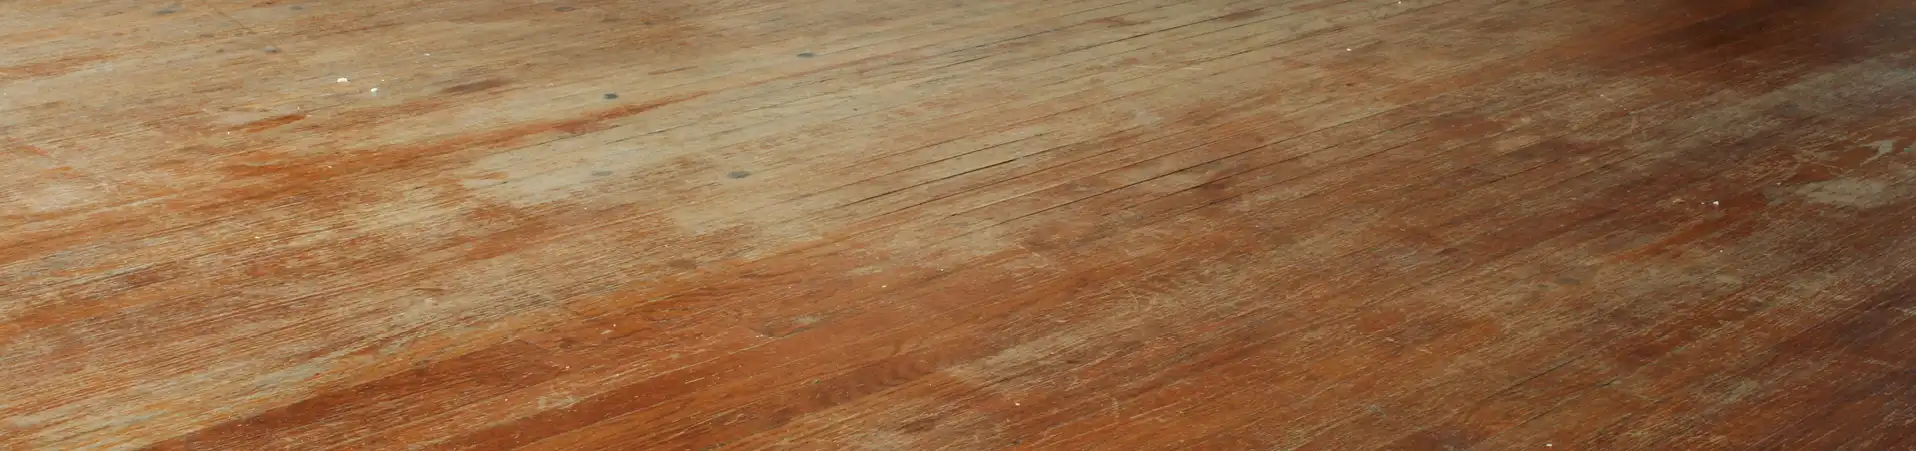 Photo of scratched and scuffed hardwood floor